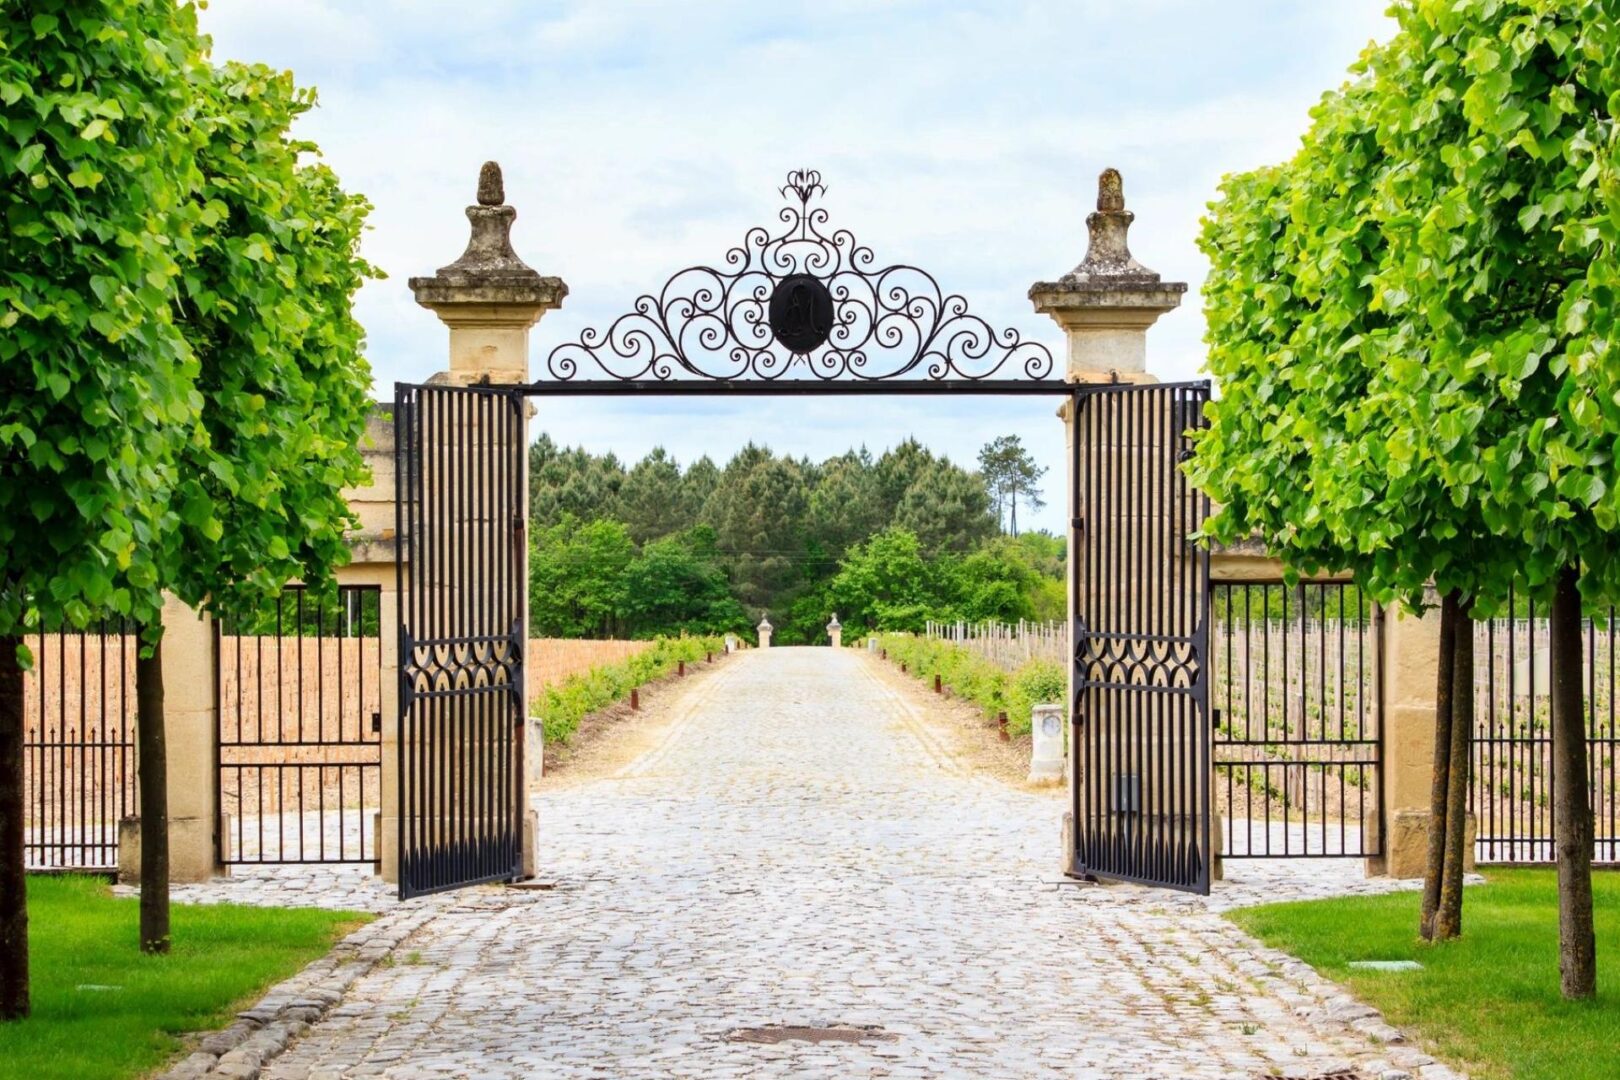 Luxury iron gate to the entrance of a vineyard